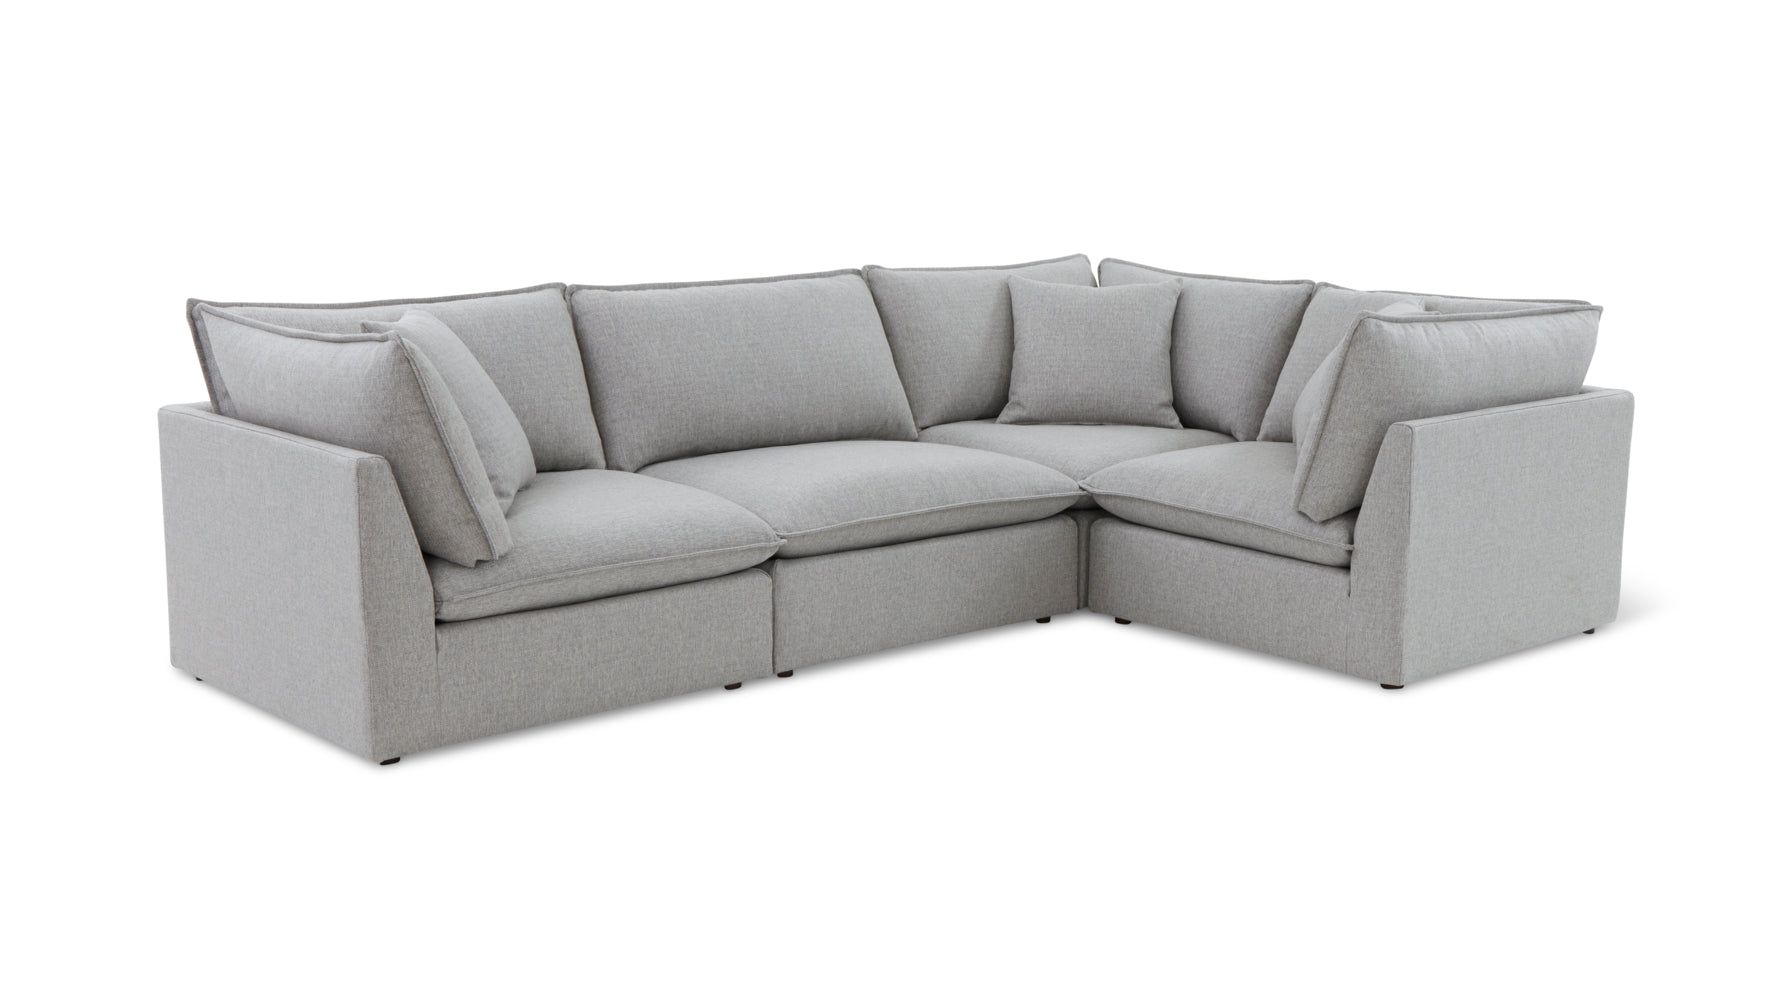 Chill Time 4-Piece Modular Sectional Closed, Heather - Image 2